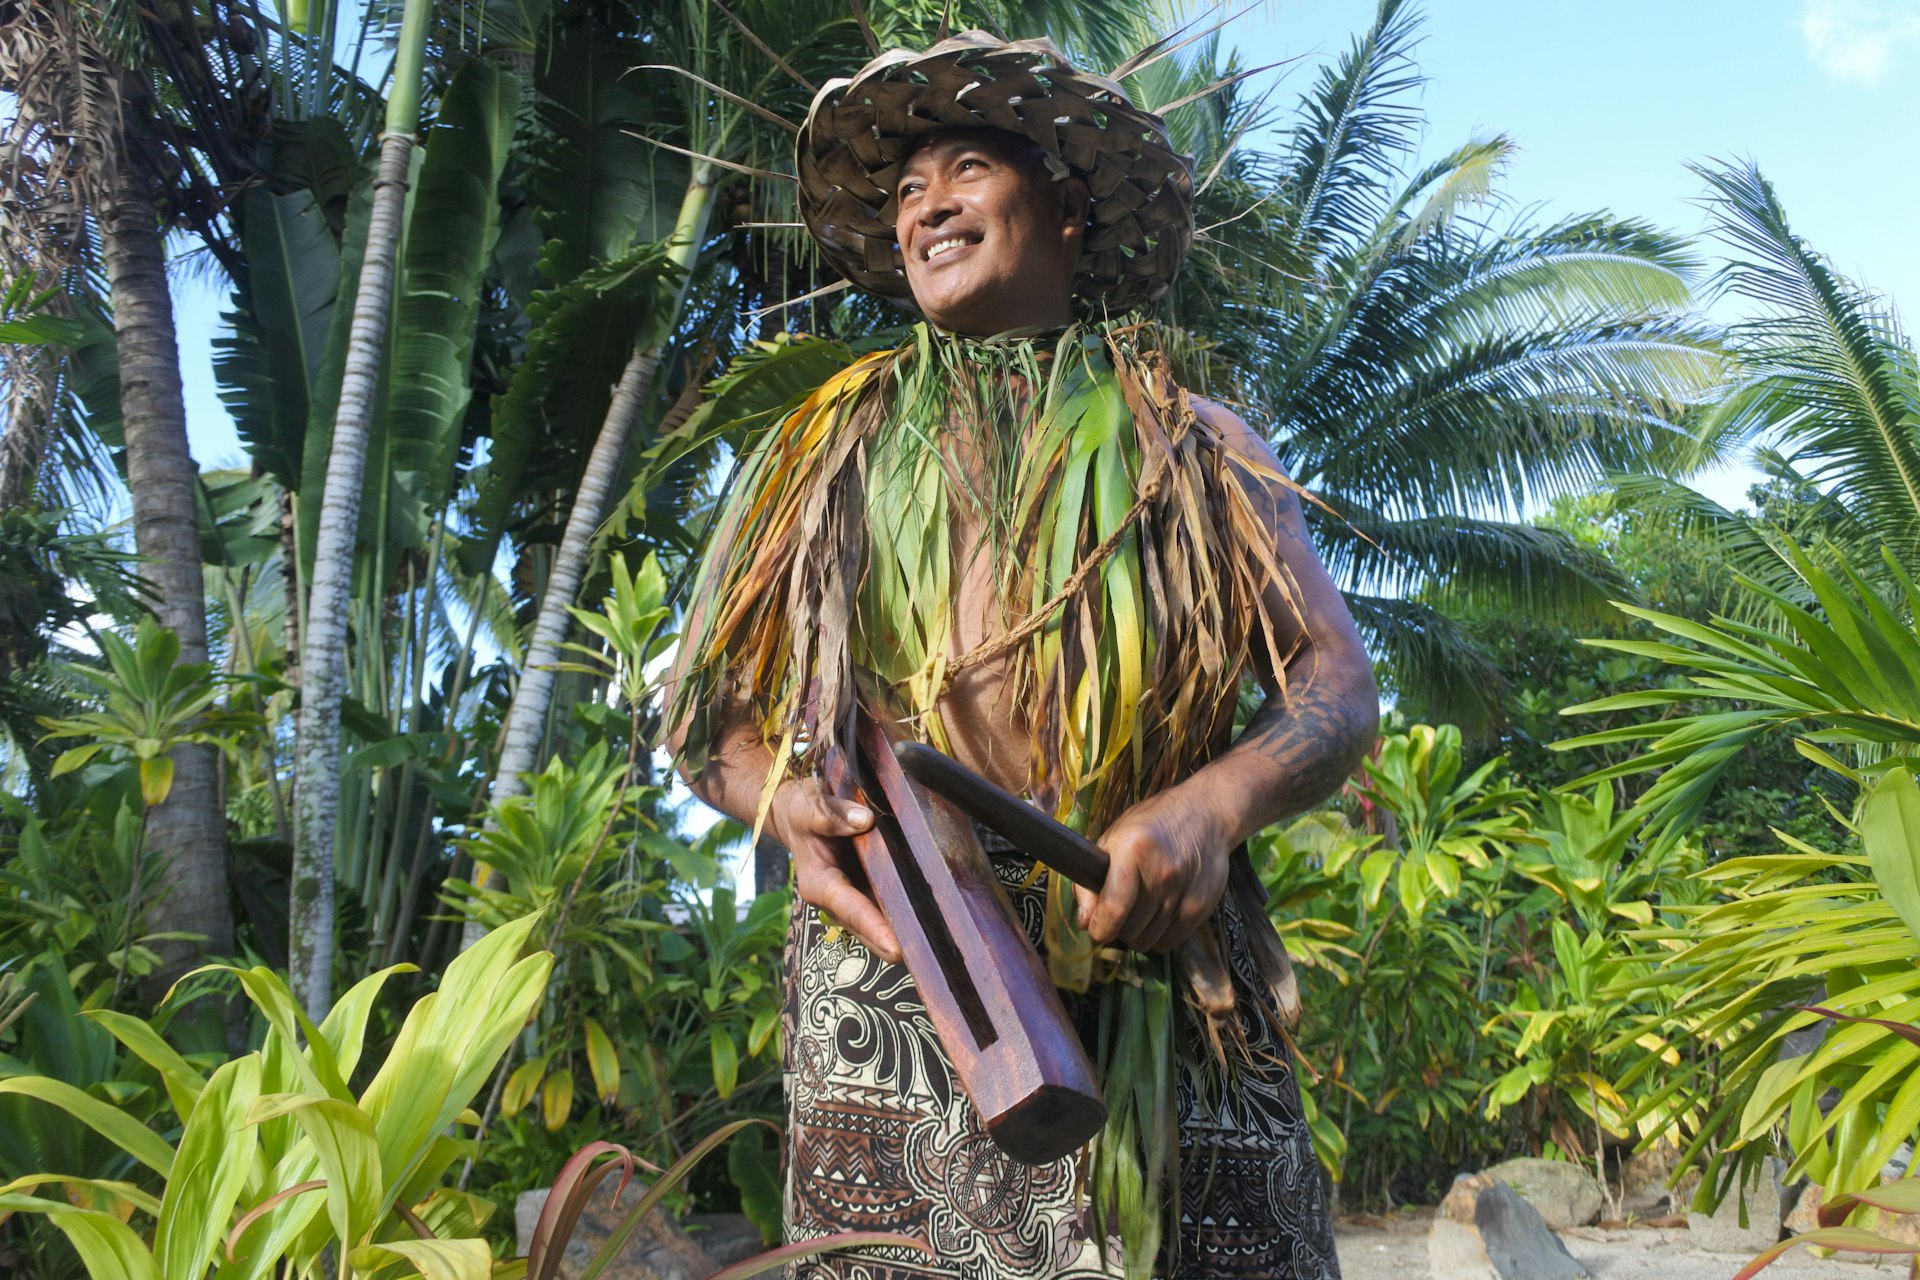 A Cook Islands musician beats out a rhythm on a traditional pate (slit drum)